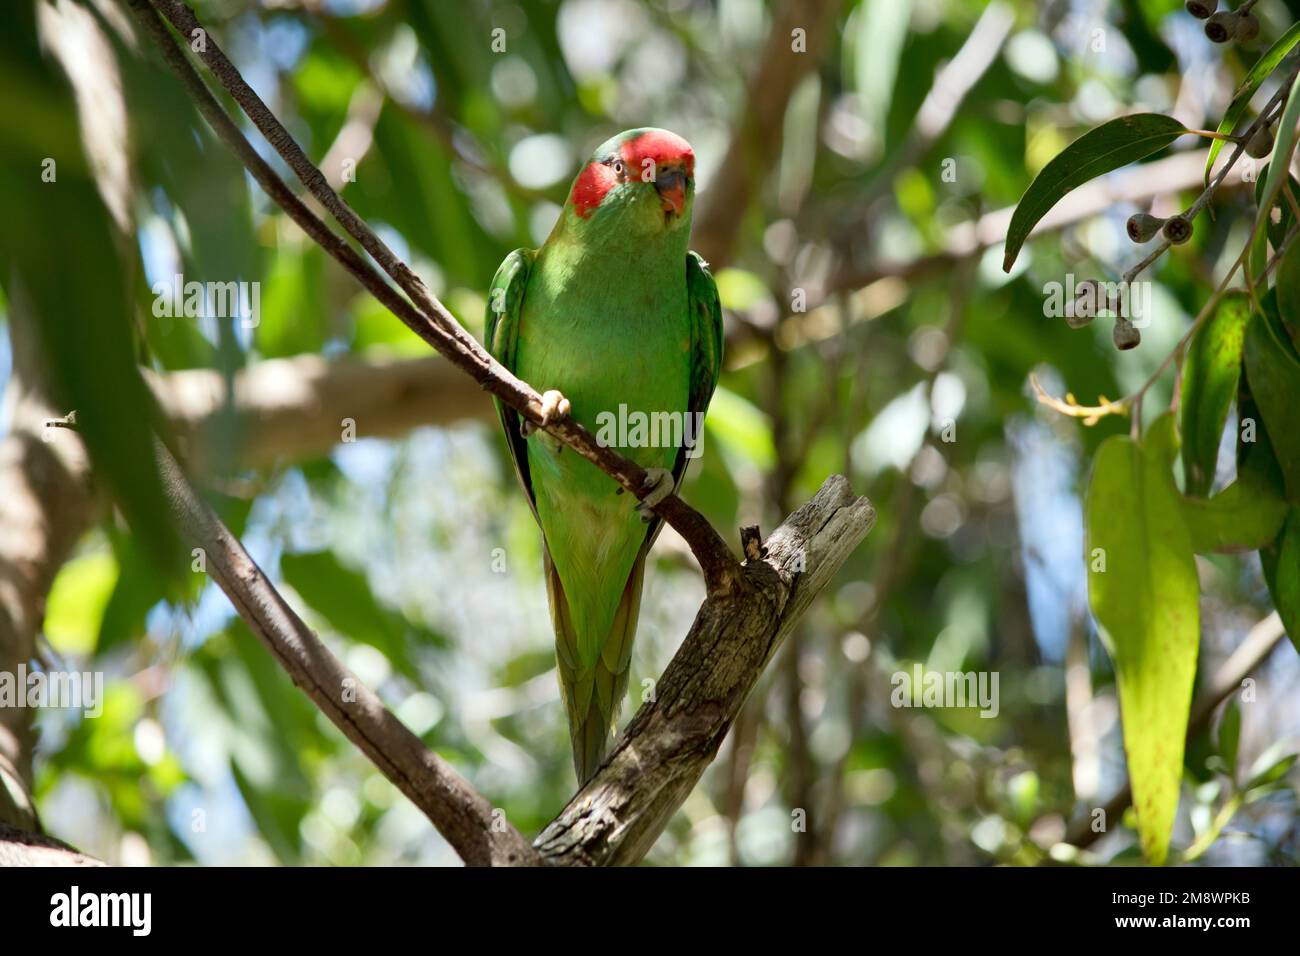 the musk lorikeet is a green bird with red over the beak with red on its cheeks Stock Photo